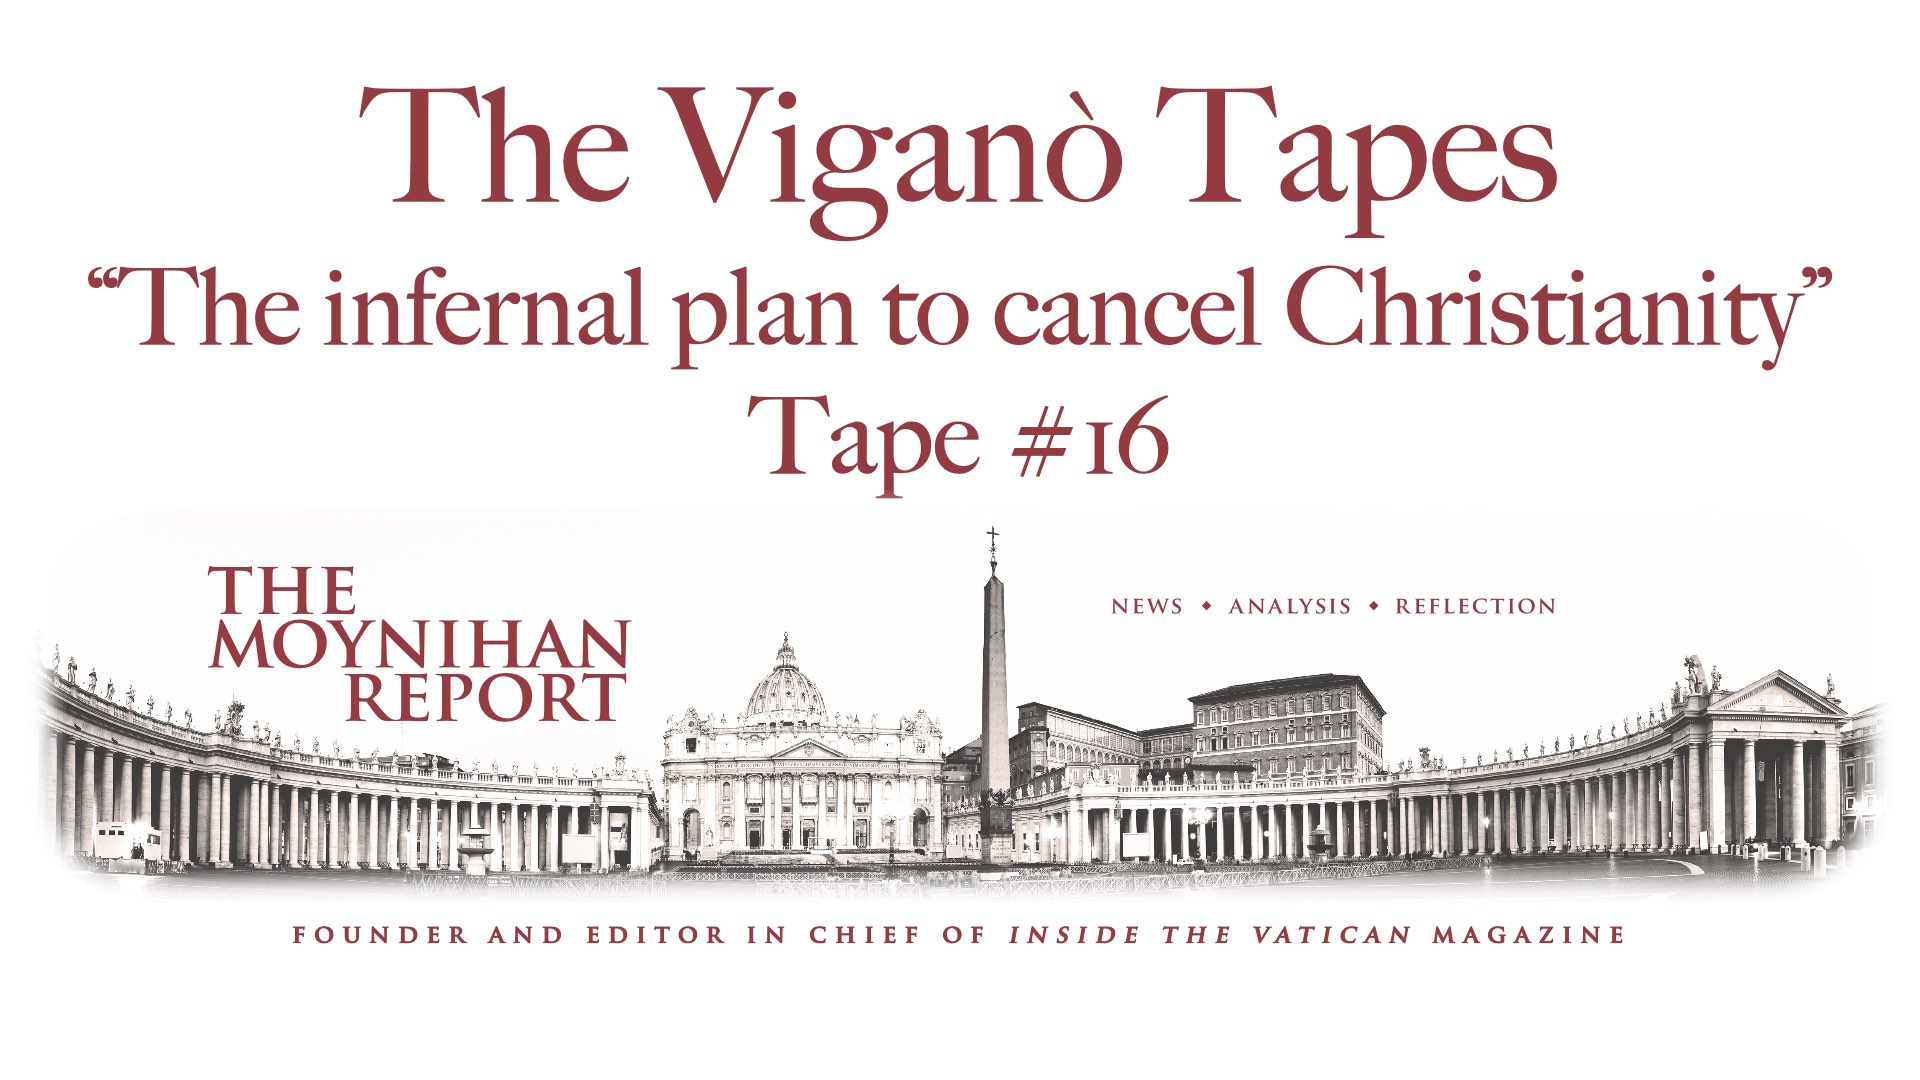 The Vigano Tapes #16